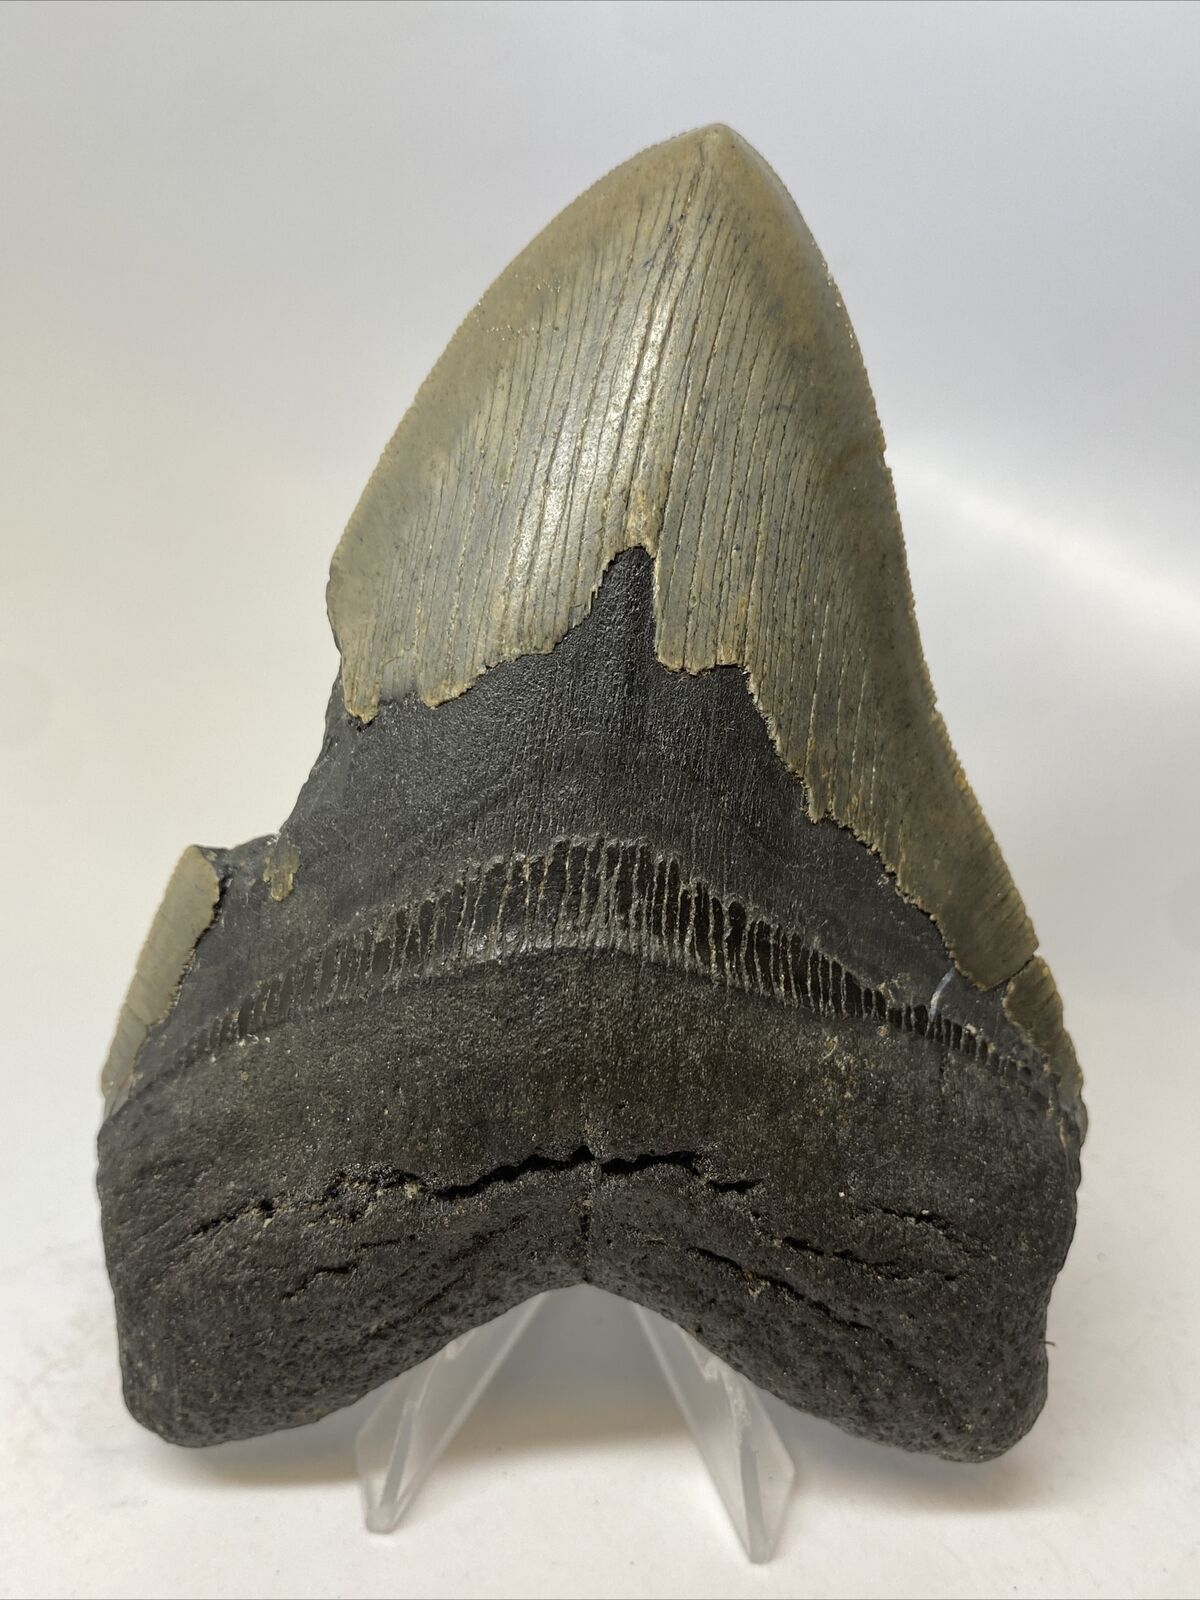 Megalodon Shark Tooth 5.30” Huge - Authentic Fossil - Natural 15344